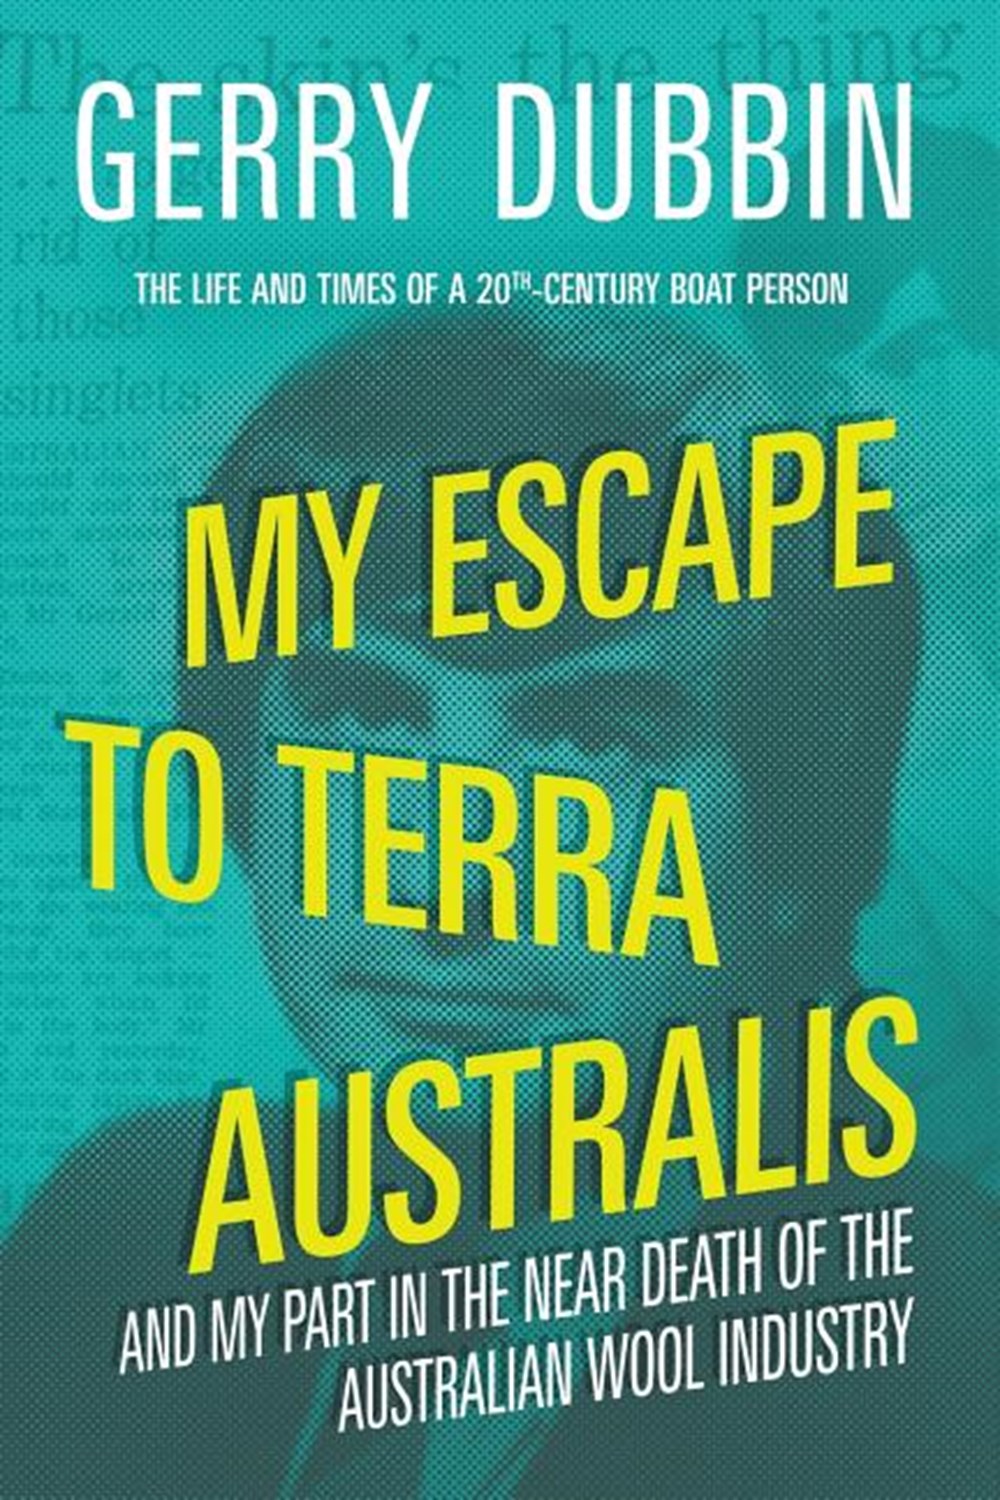 My Escape to Terra Australis And My Part in the Near Death of the Australian Wool Industry